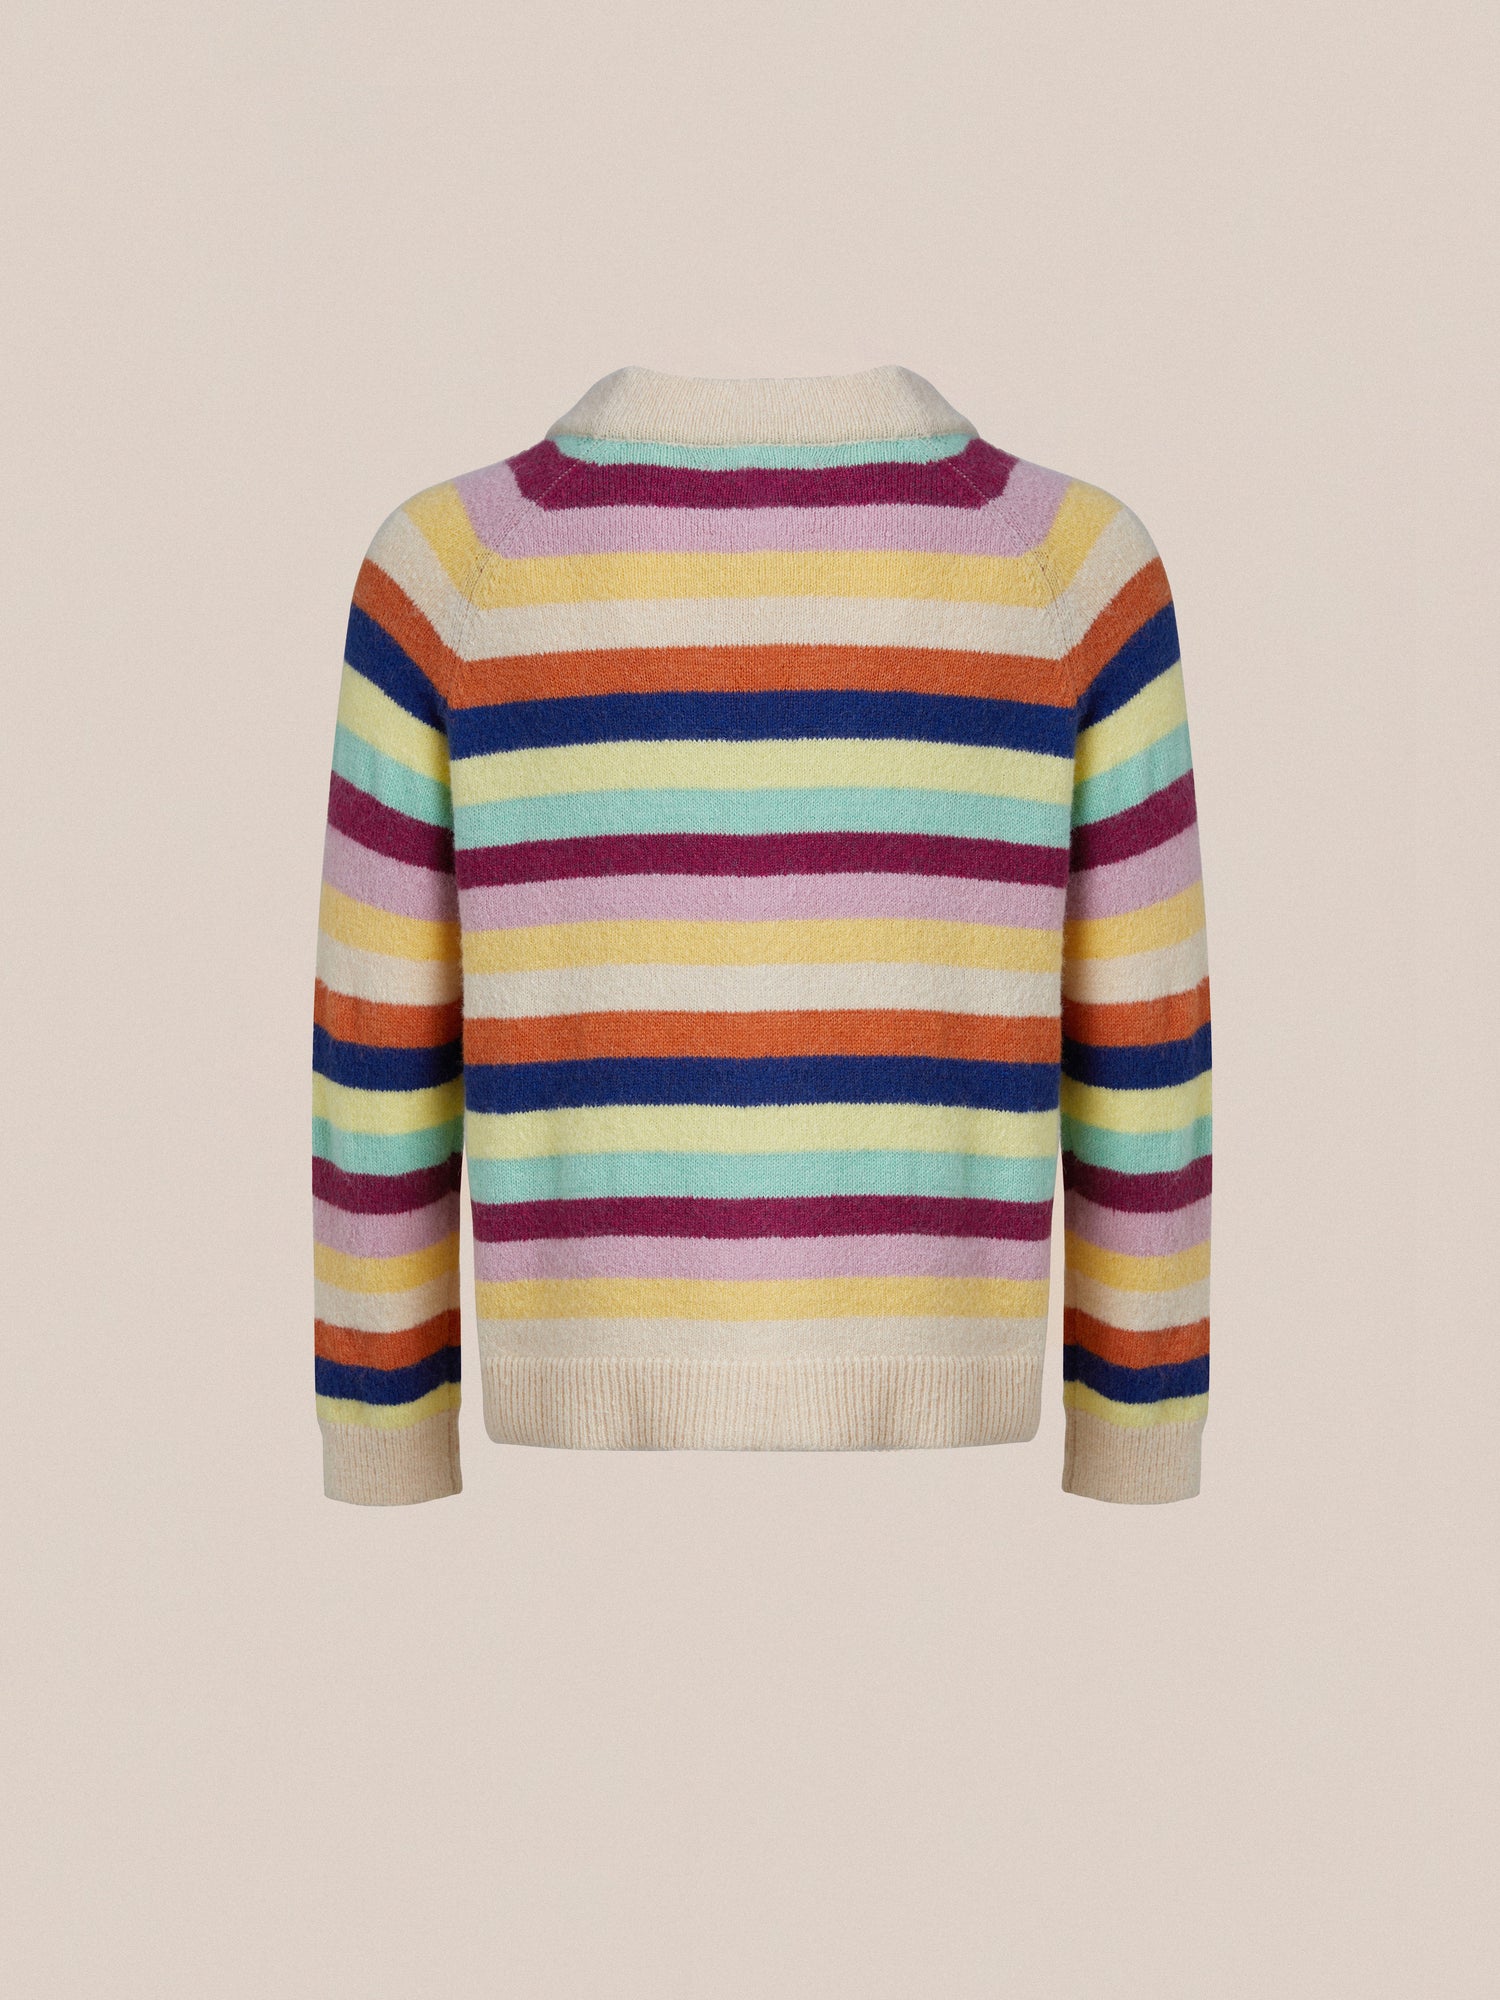 A Razi Multi Stripe Cardigan with vibrant hues on a white background by Found.